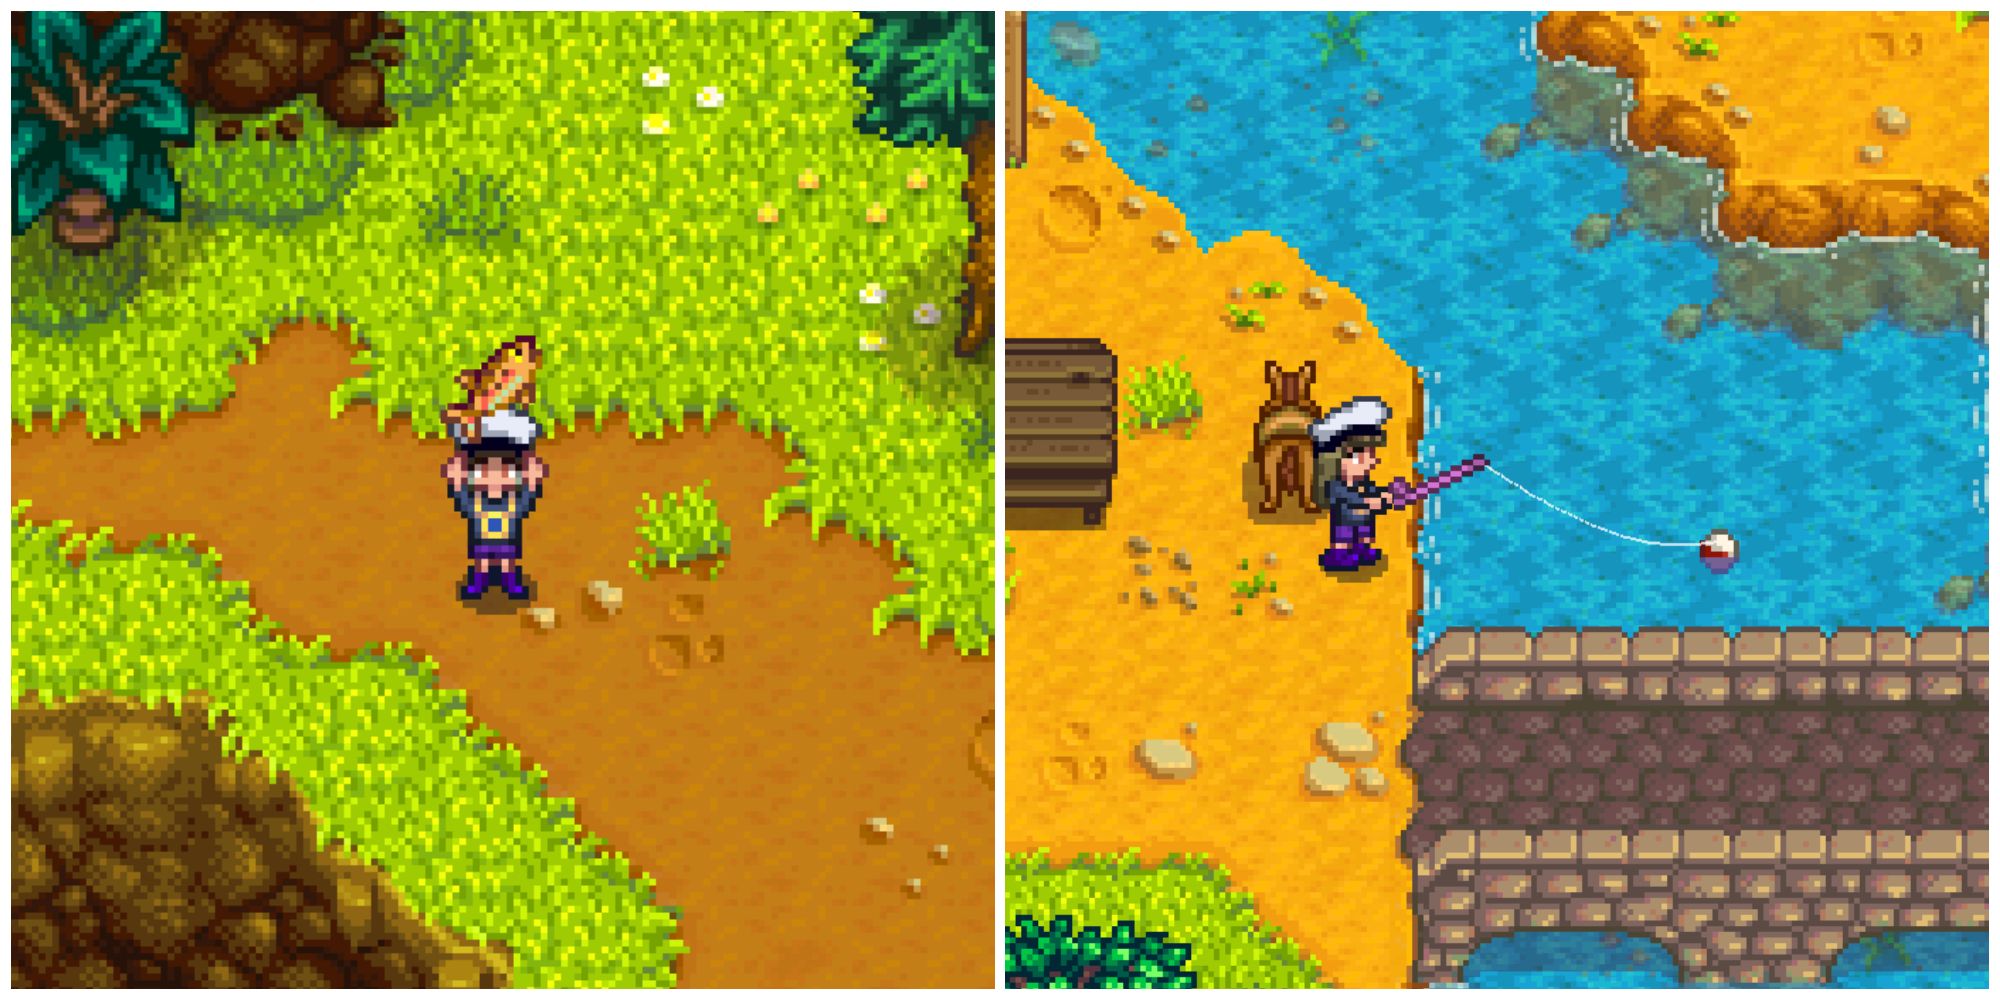 Split image of a character holding a Rainbow Trout and a character fishing in the river in Stardew Valley